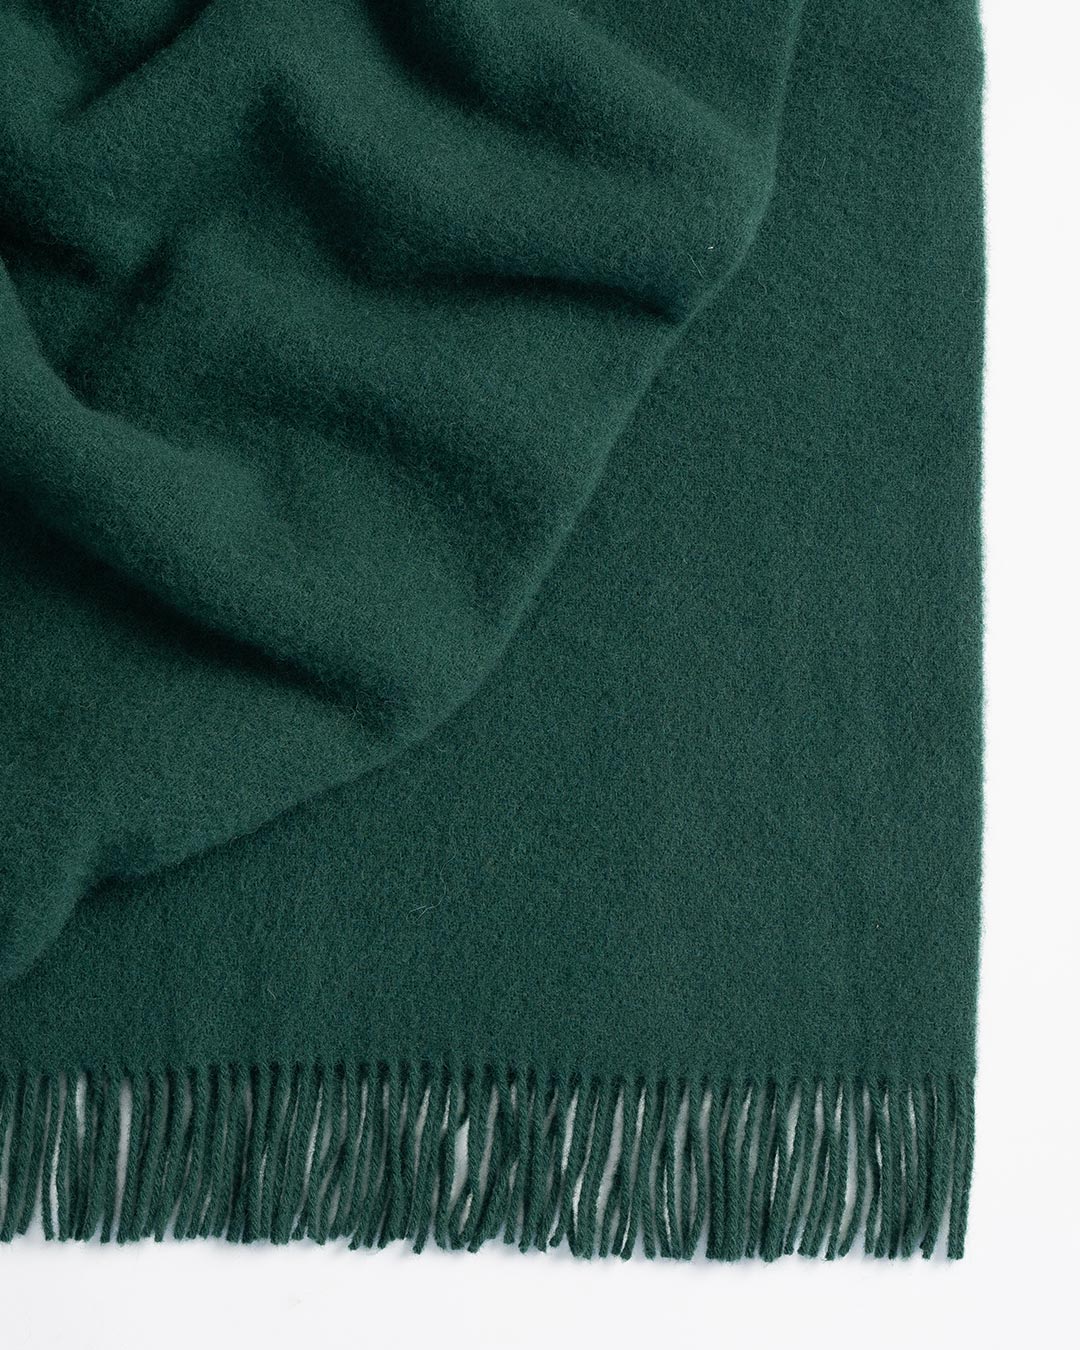 Made from 100% New Zealand lambswool, Nevis throw blankets in forest are simply luxurious. All of our throws make the perfect companion over cooler days and nights, and can also be enjoyed outdoors